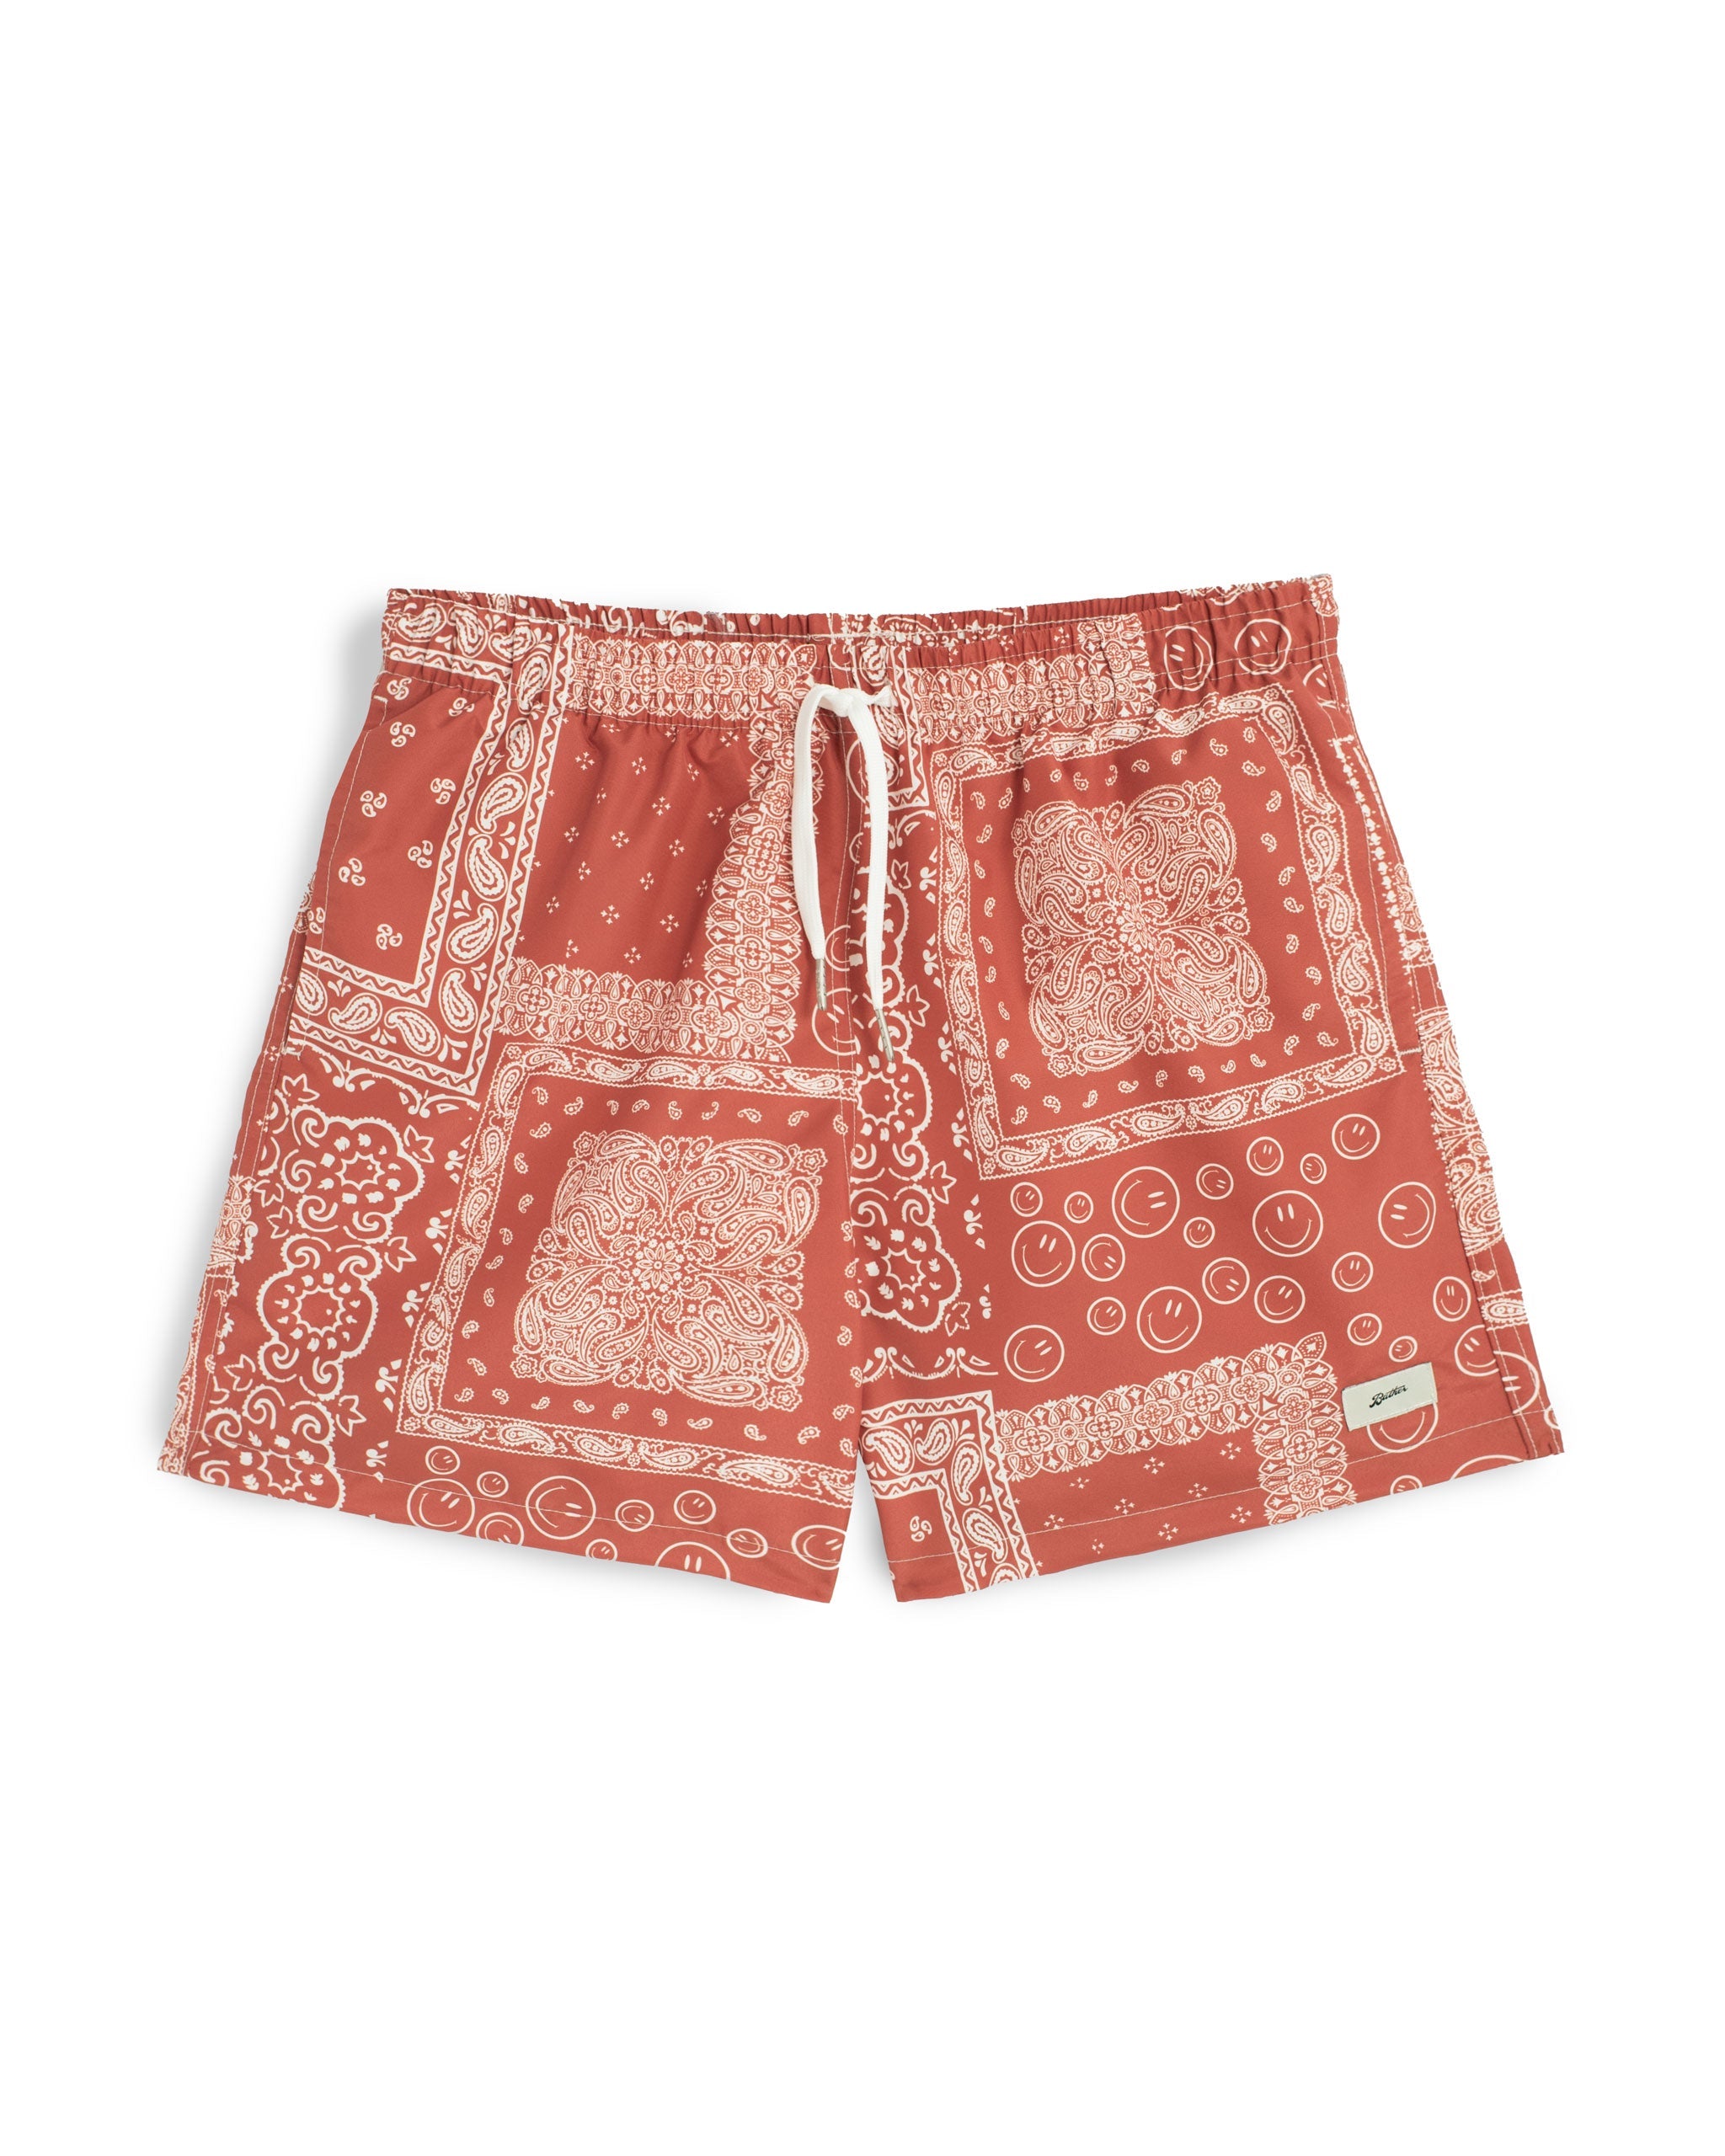 A terracotta red swim trunk with an all-over bandana print